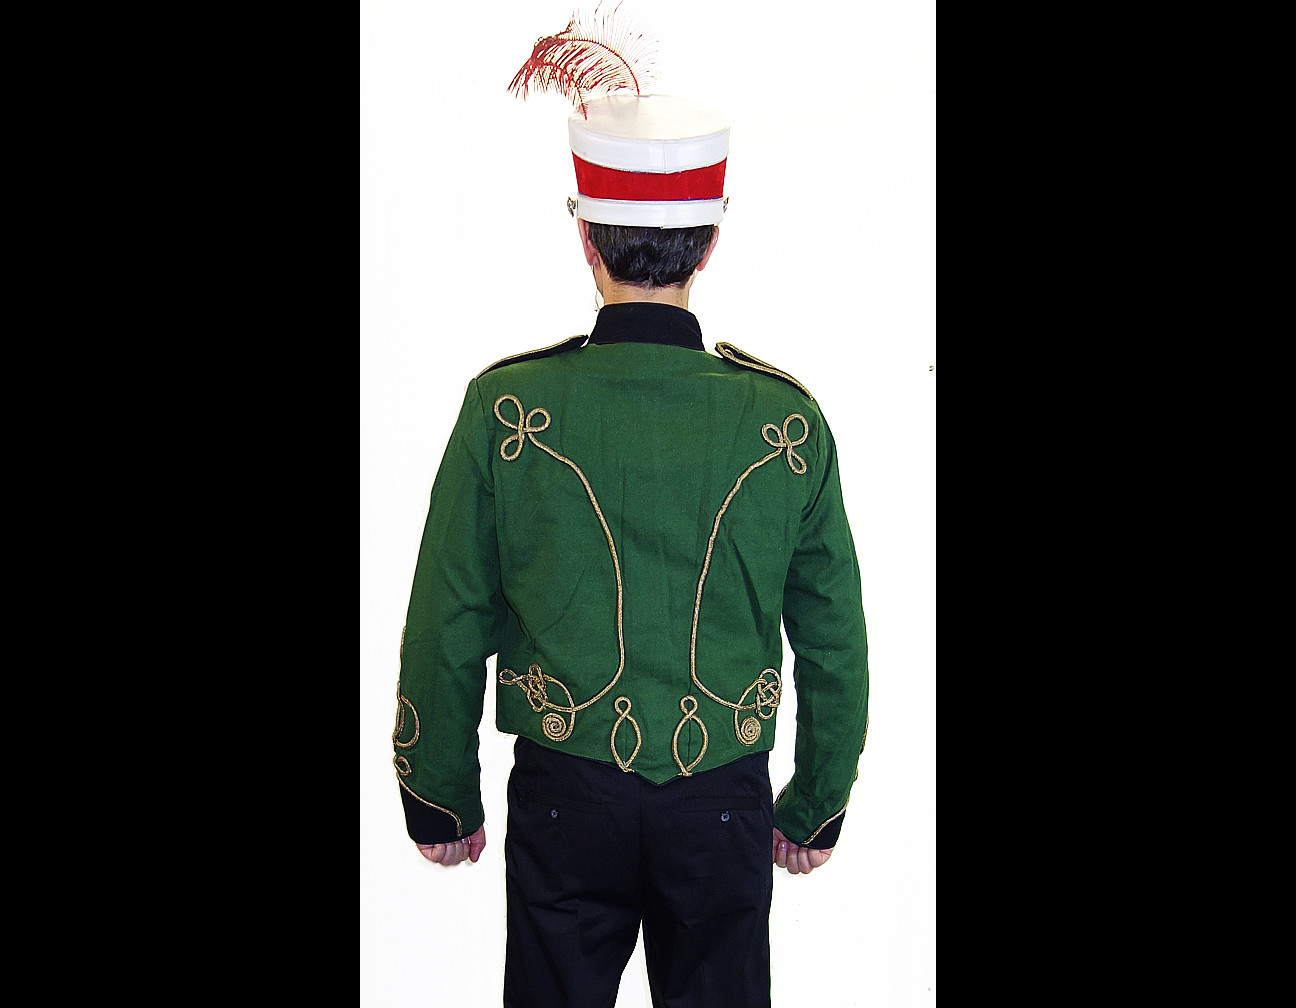 Marchinglinks Green, white and gold marching band uniforms